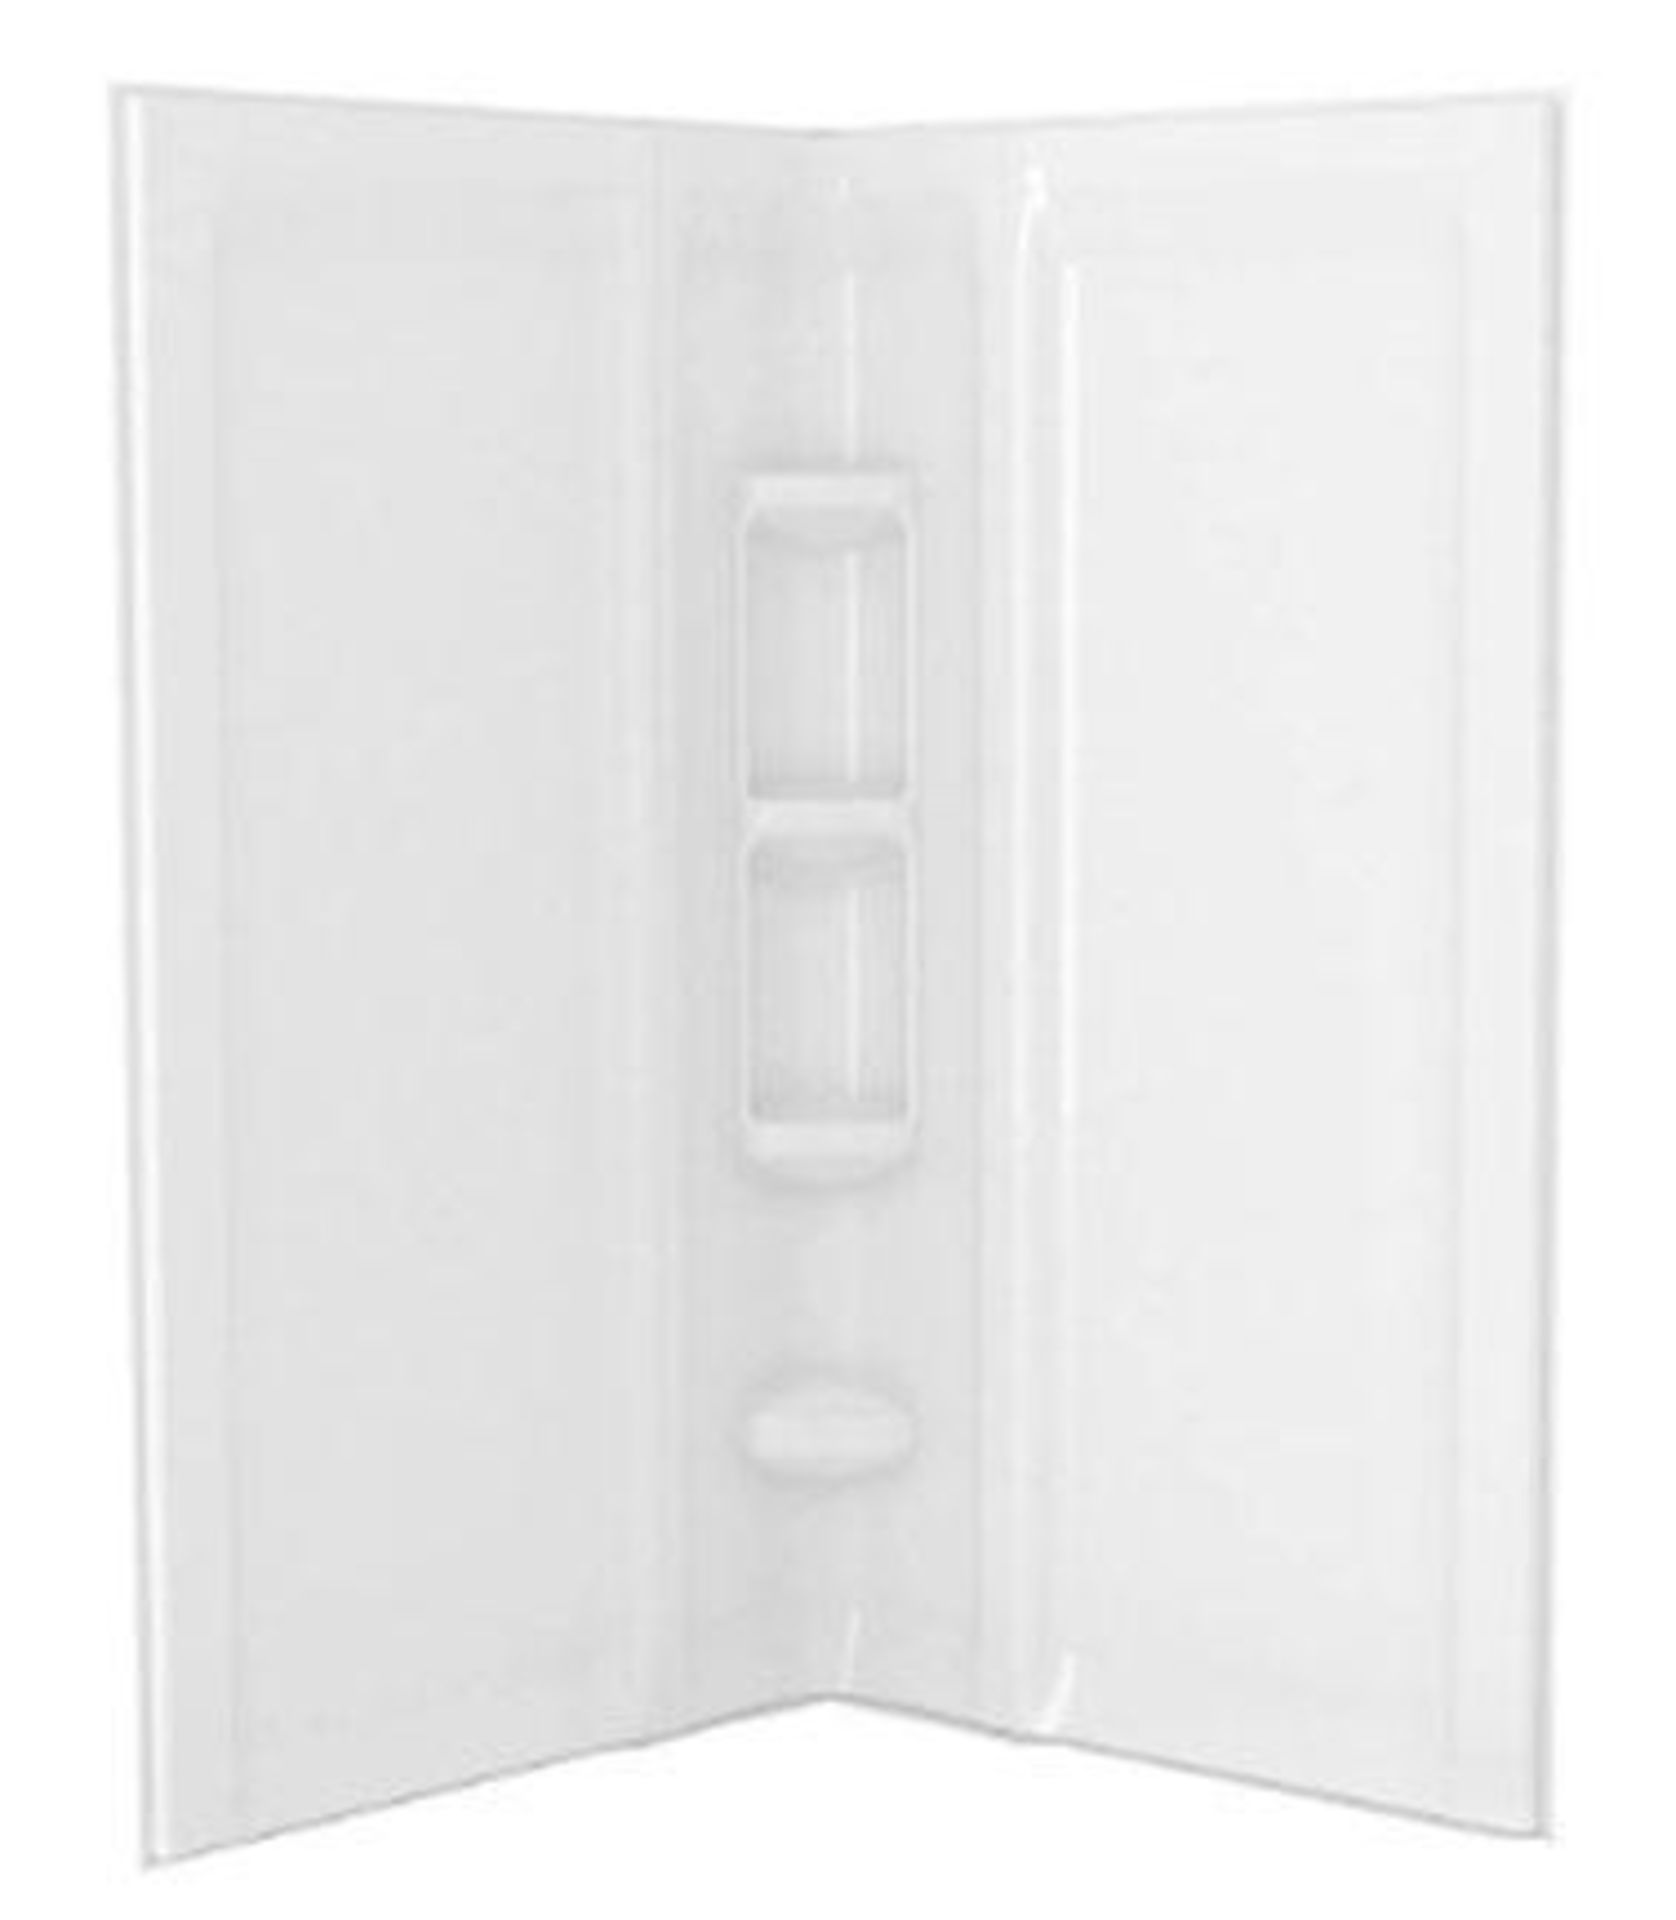 (3) American Standard "Axis" 3-Piece Shower Wall Sets, Model 3838CW.020, Color: White, Polystyrene w